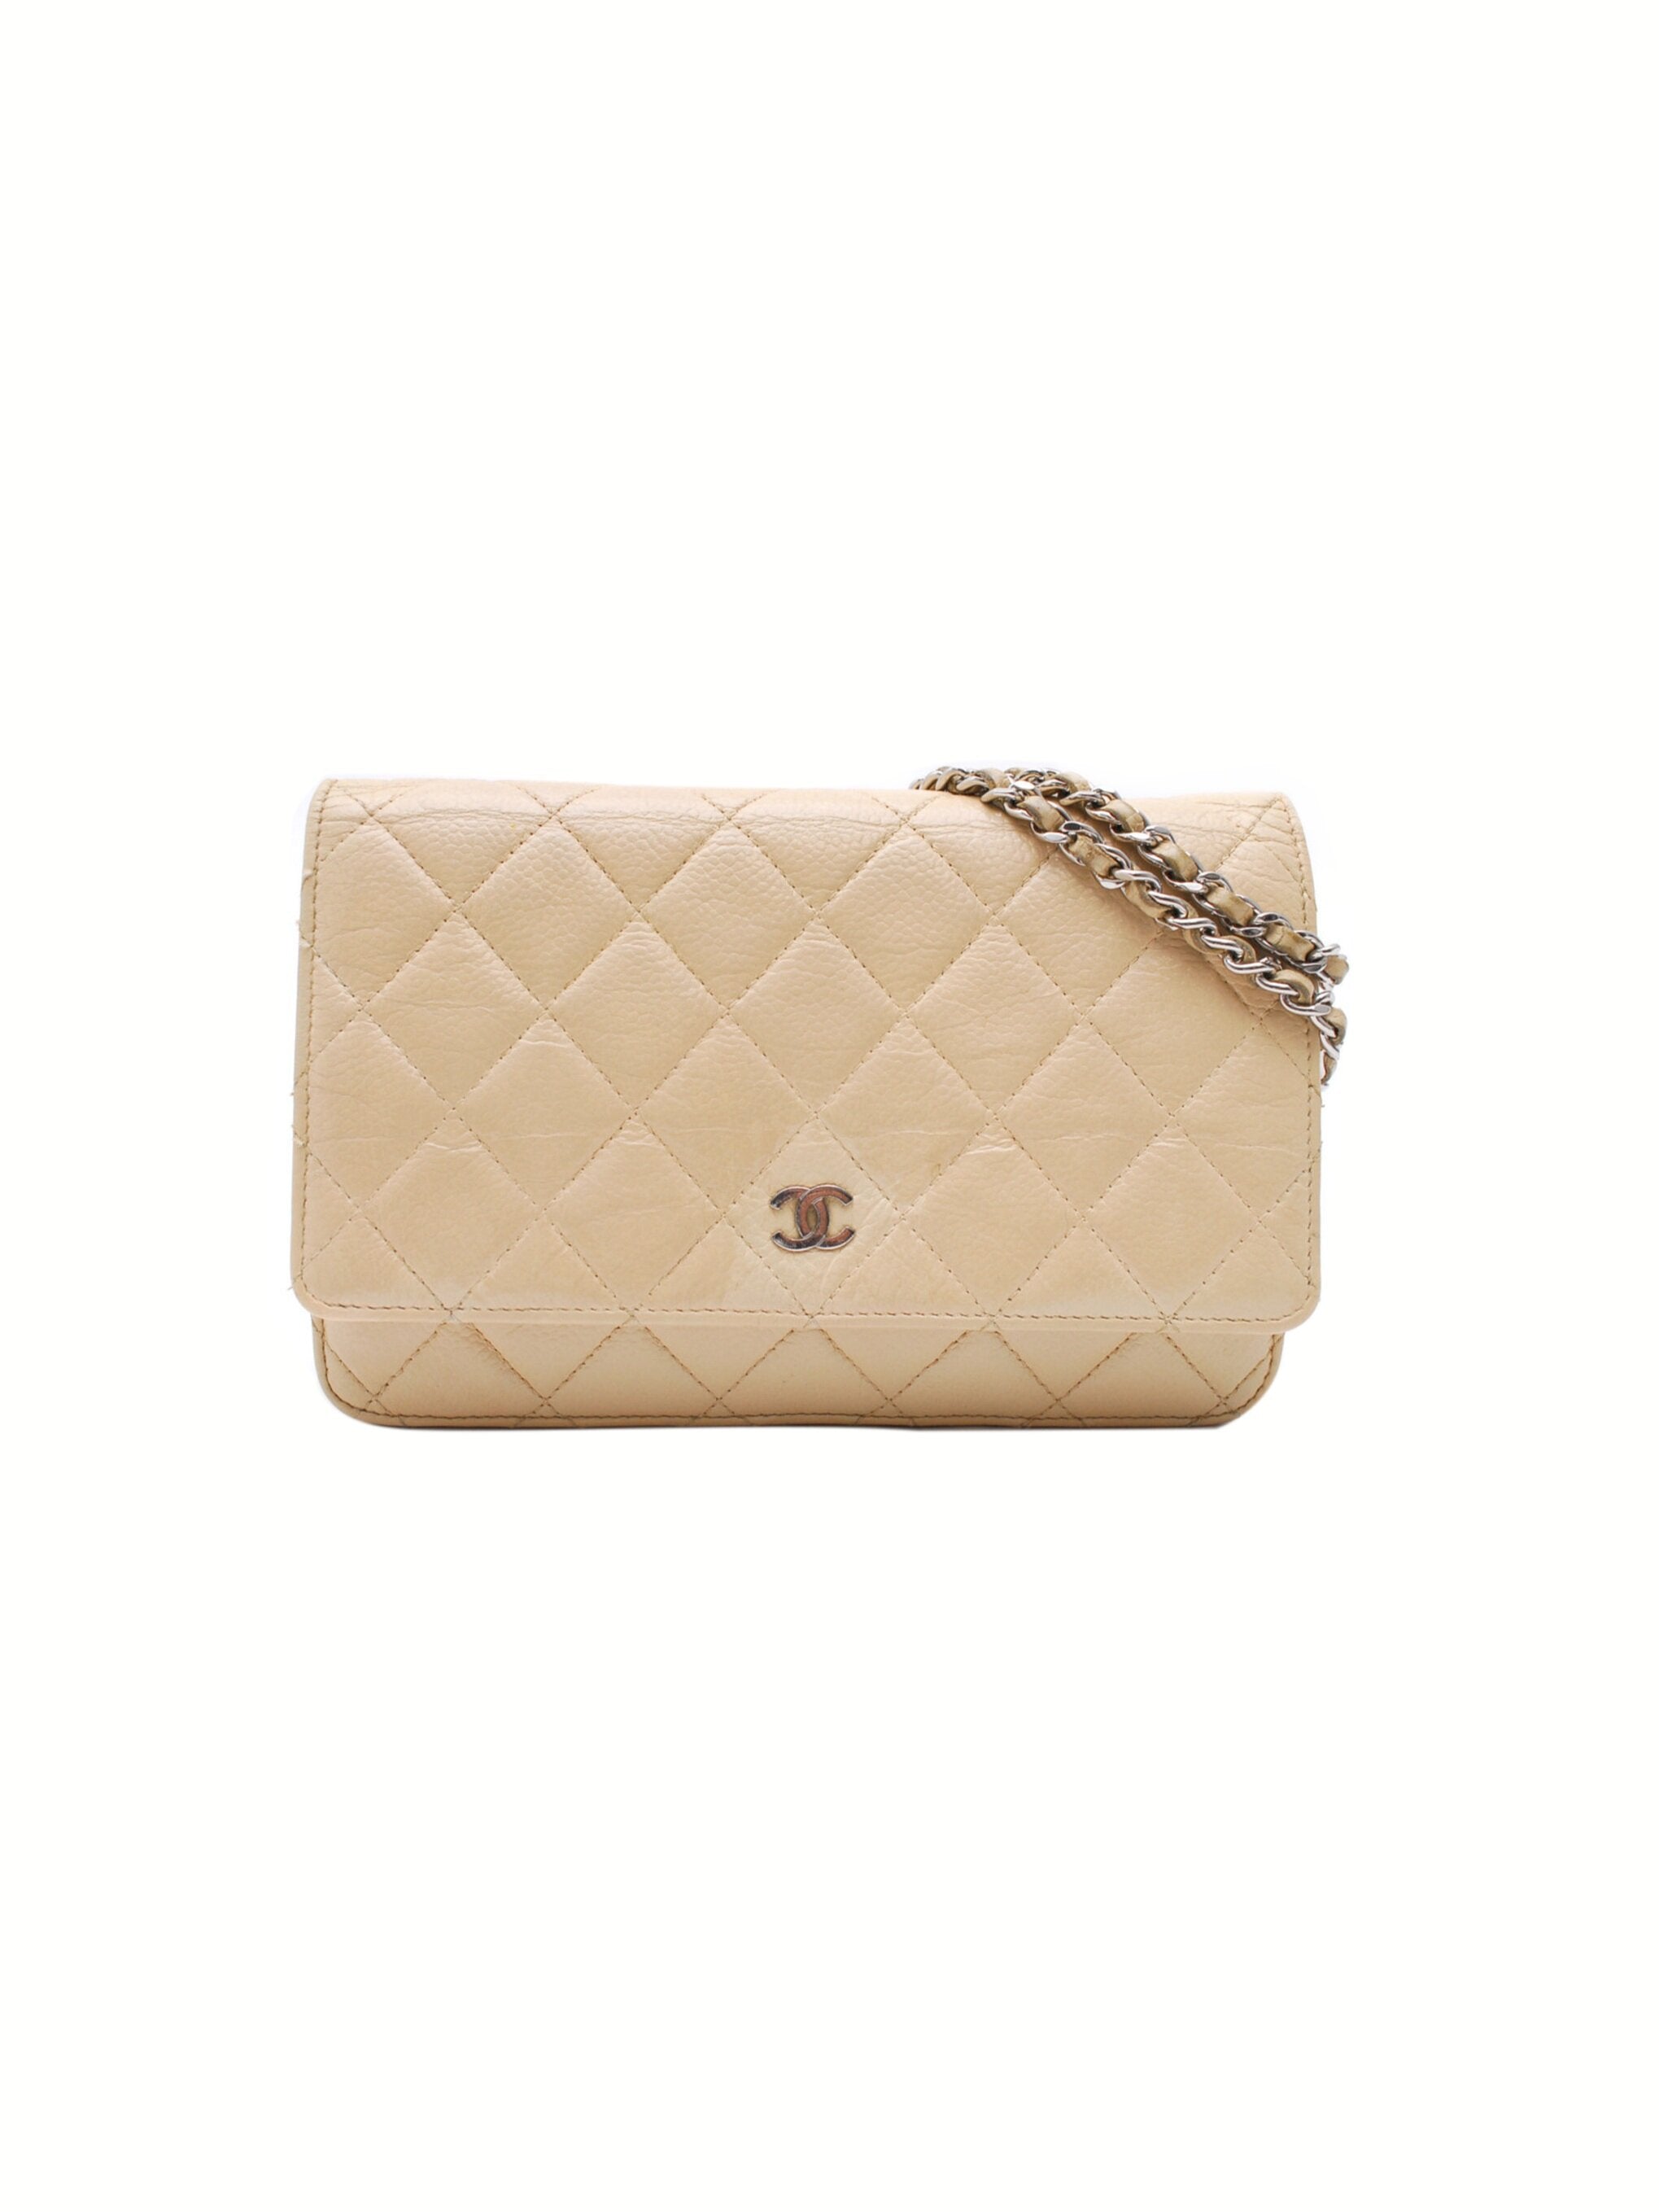 Chanel 1990s Nude Leather Chain Flap Bag